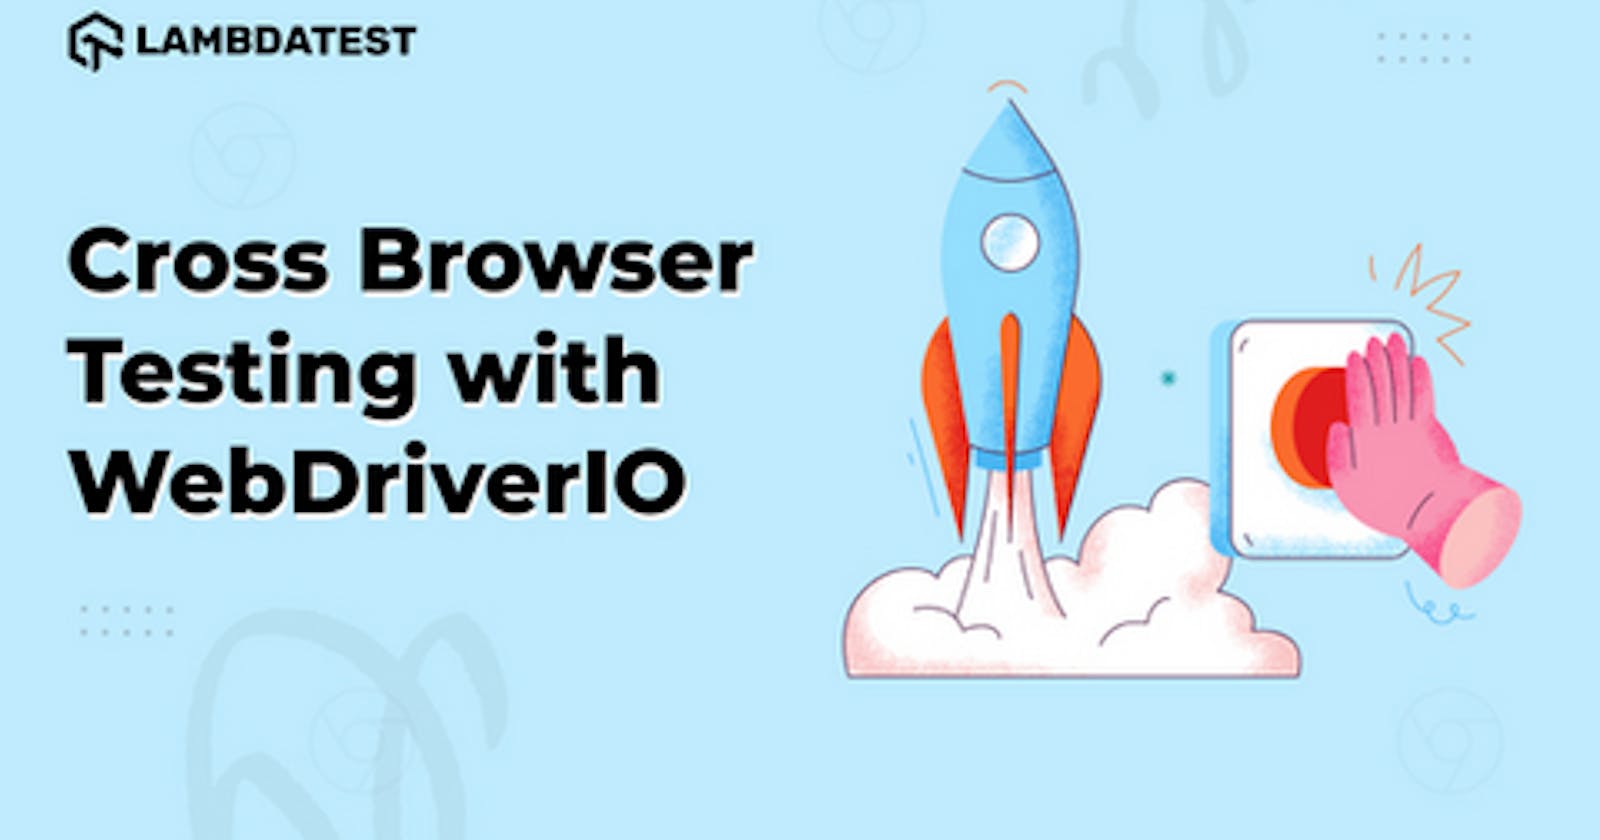 Cross Browser Testing With WebDriverIO